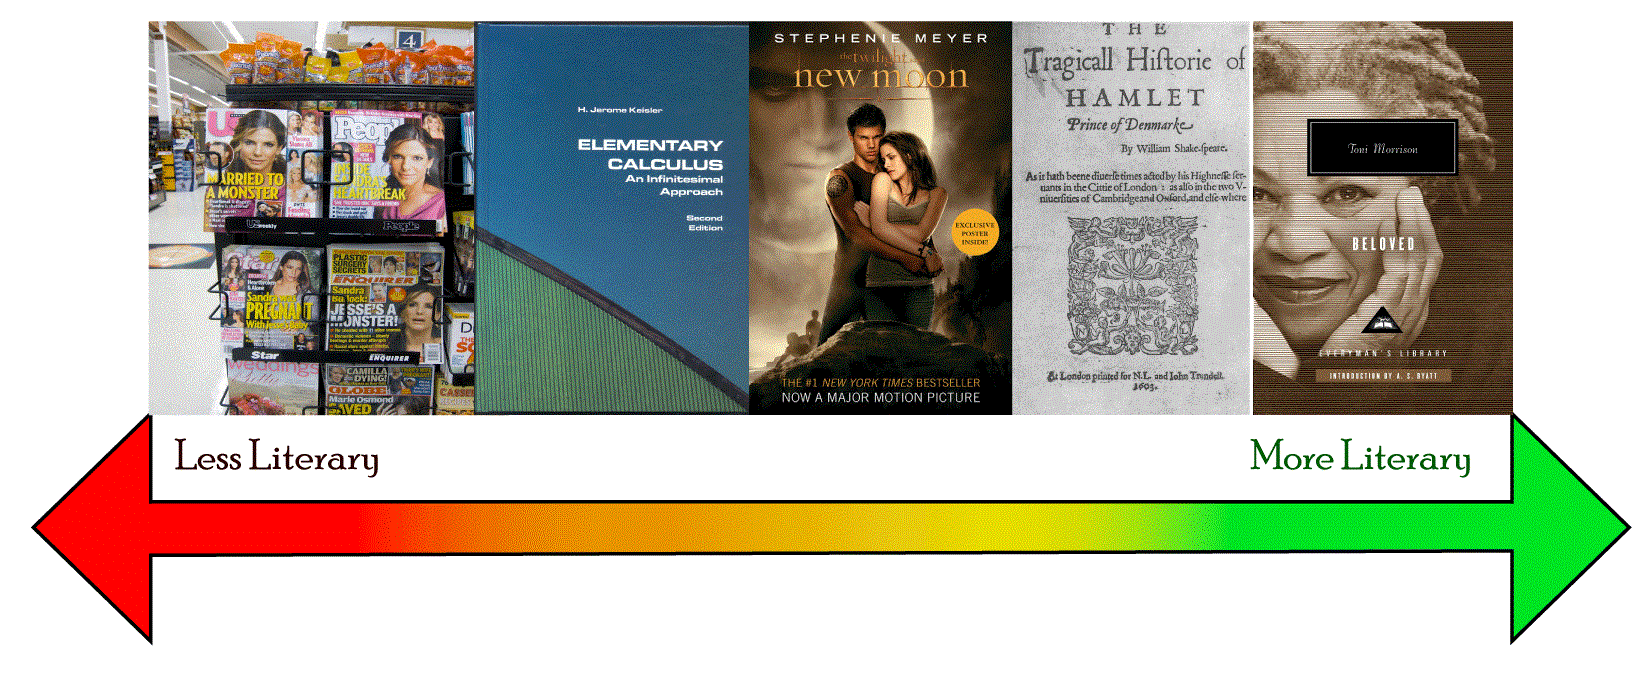 literary spectrum: a collection of sample texts arranged from less literary to more literary, with people magazine on the far left and Shakespeare and Toni Morrison on the far right